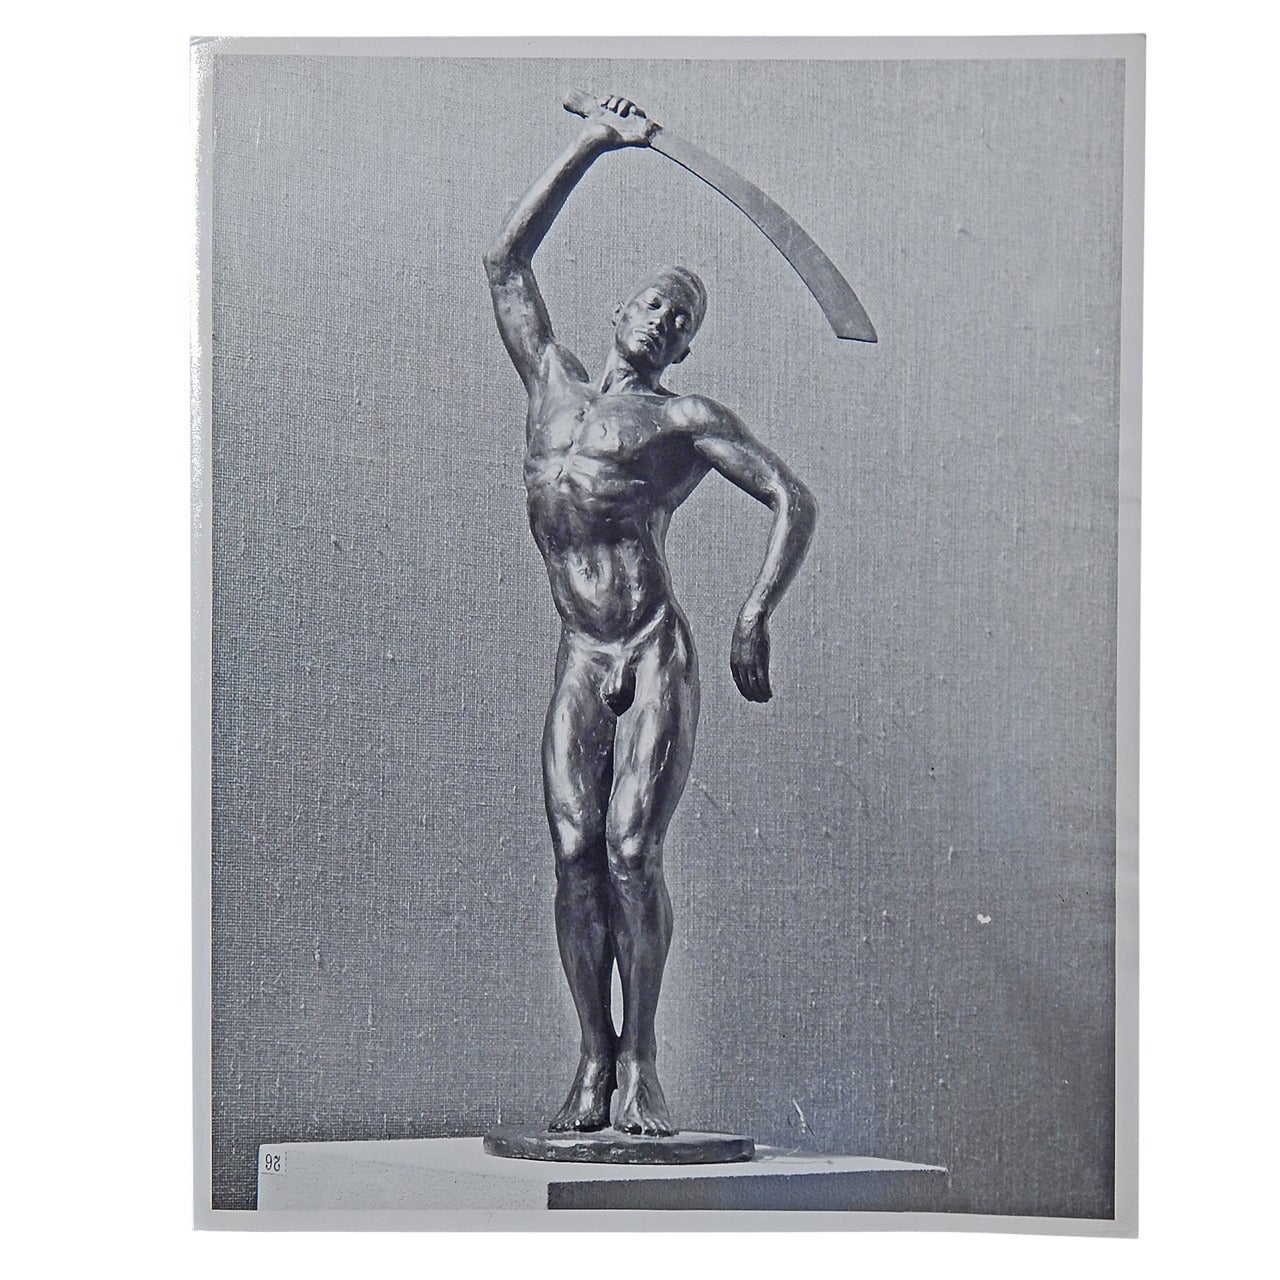 "Benga, " Important Photograph of Barthe Sculpture by M. Smith